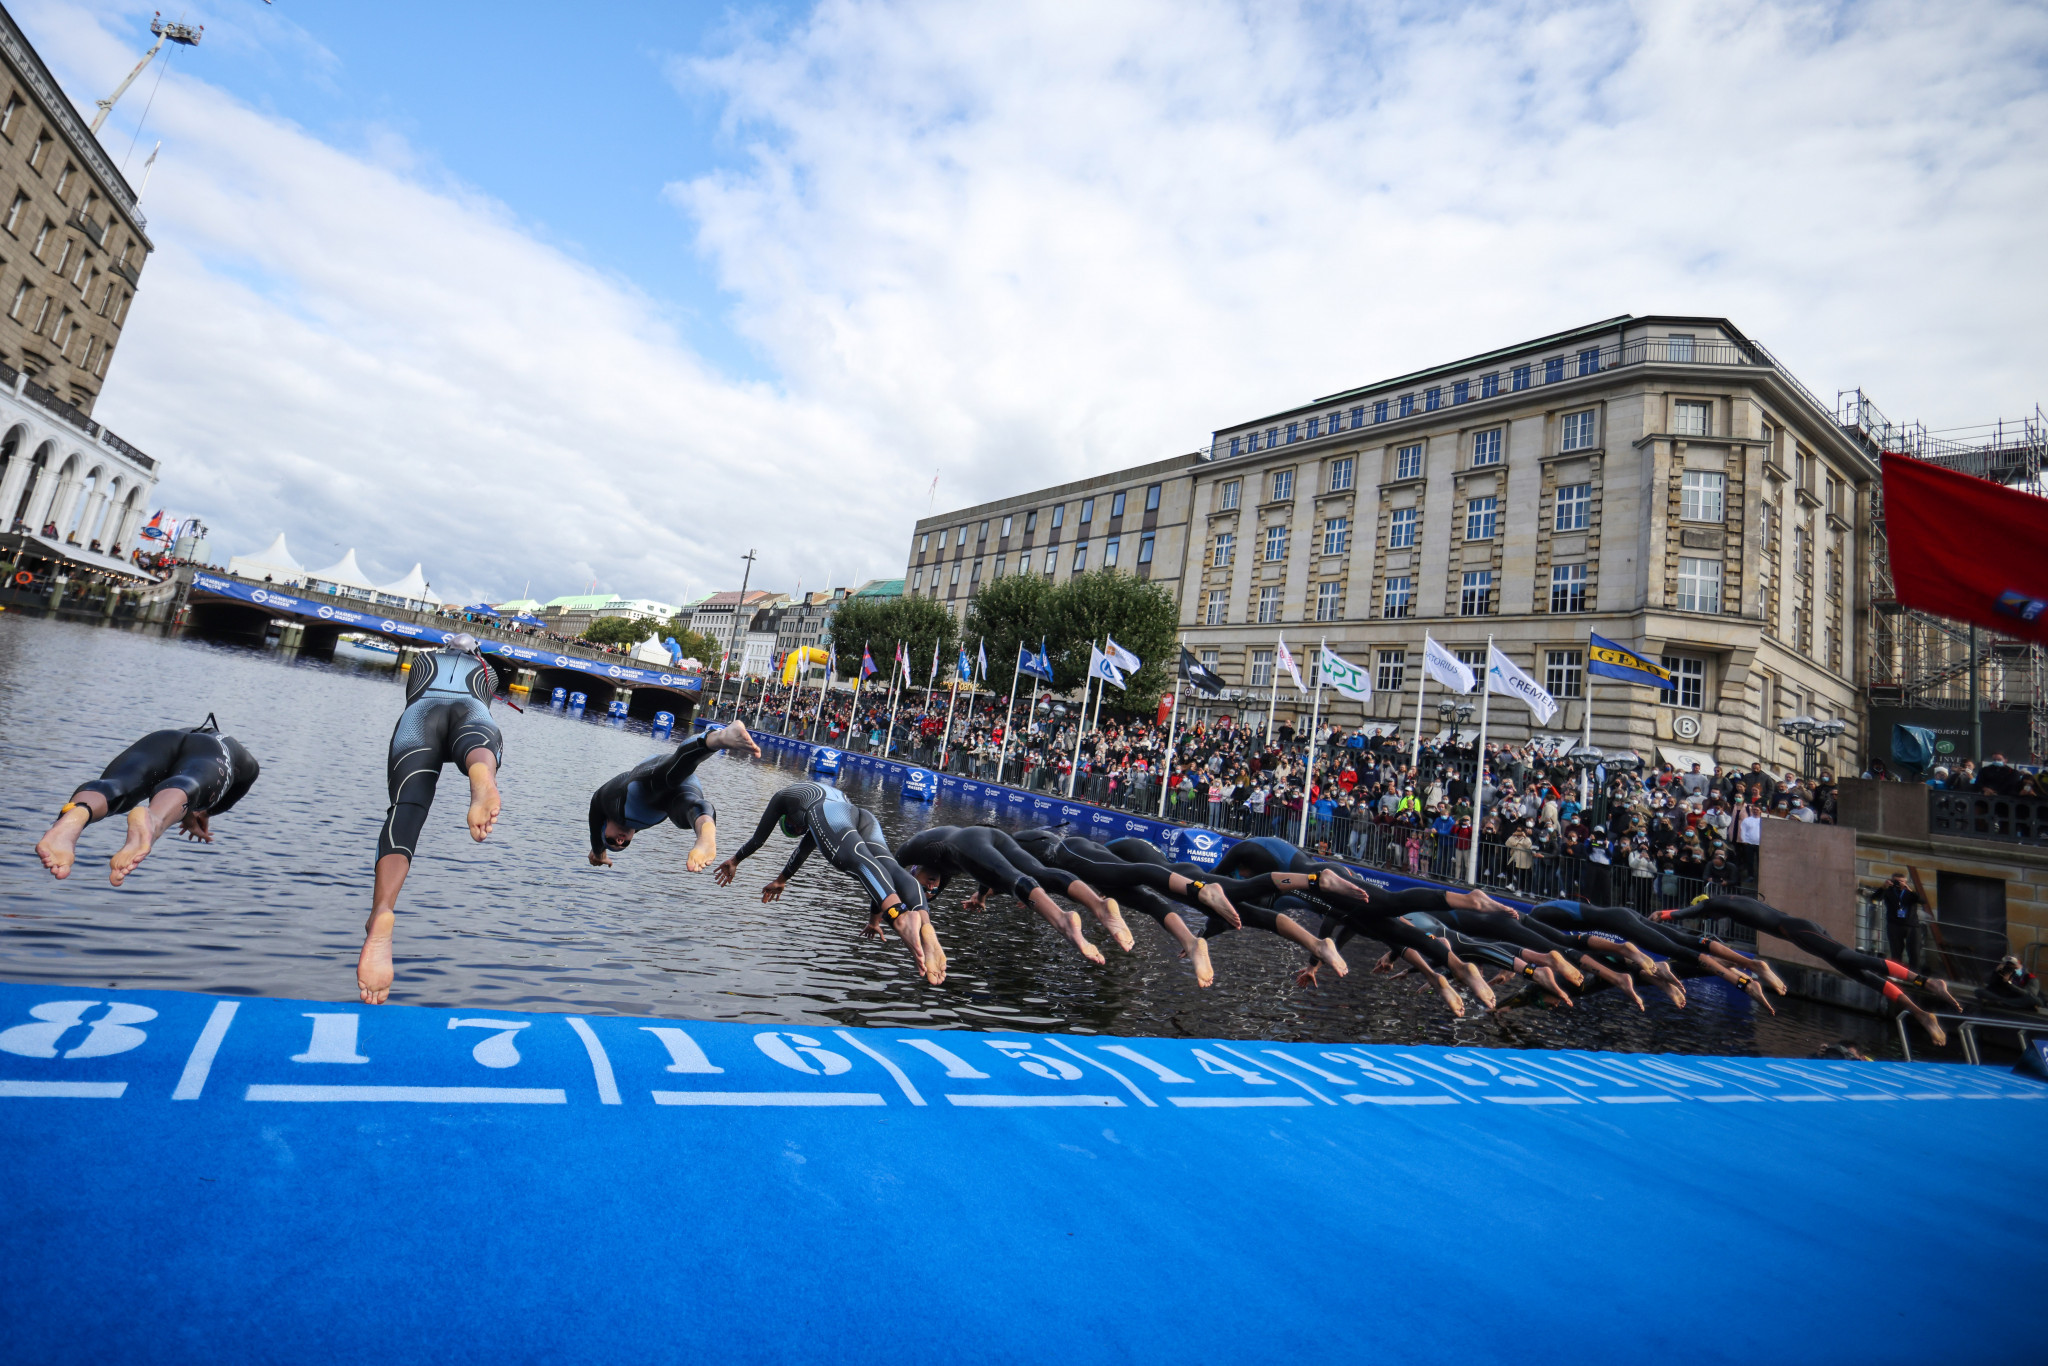 World Triathlon Executive Board lifts suspension of participation of Russians and Belarusians in its events